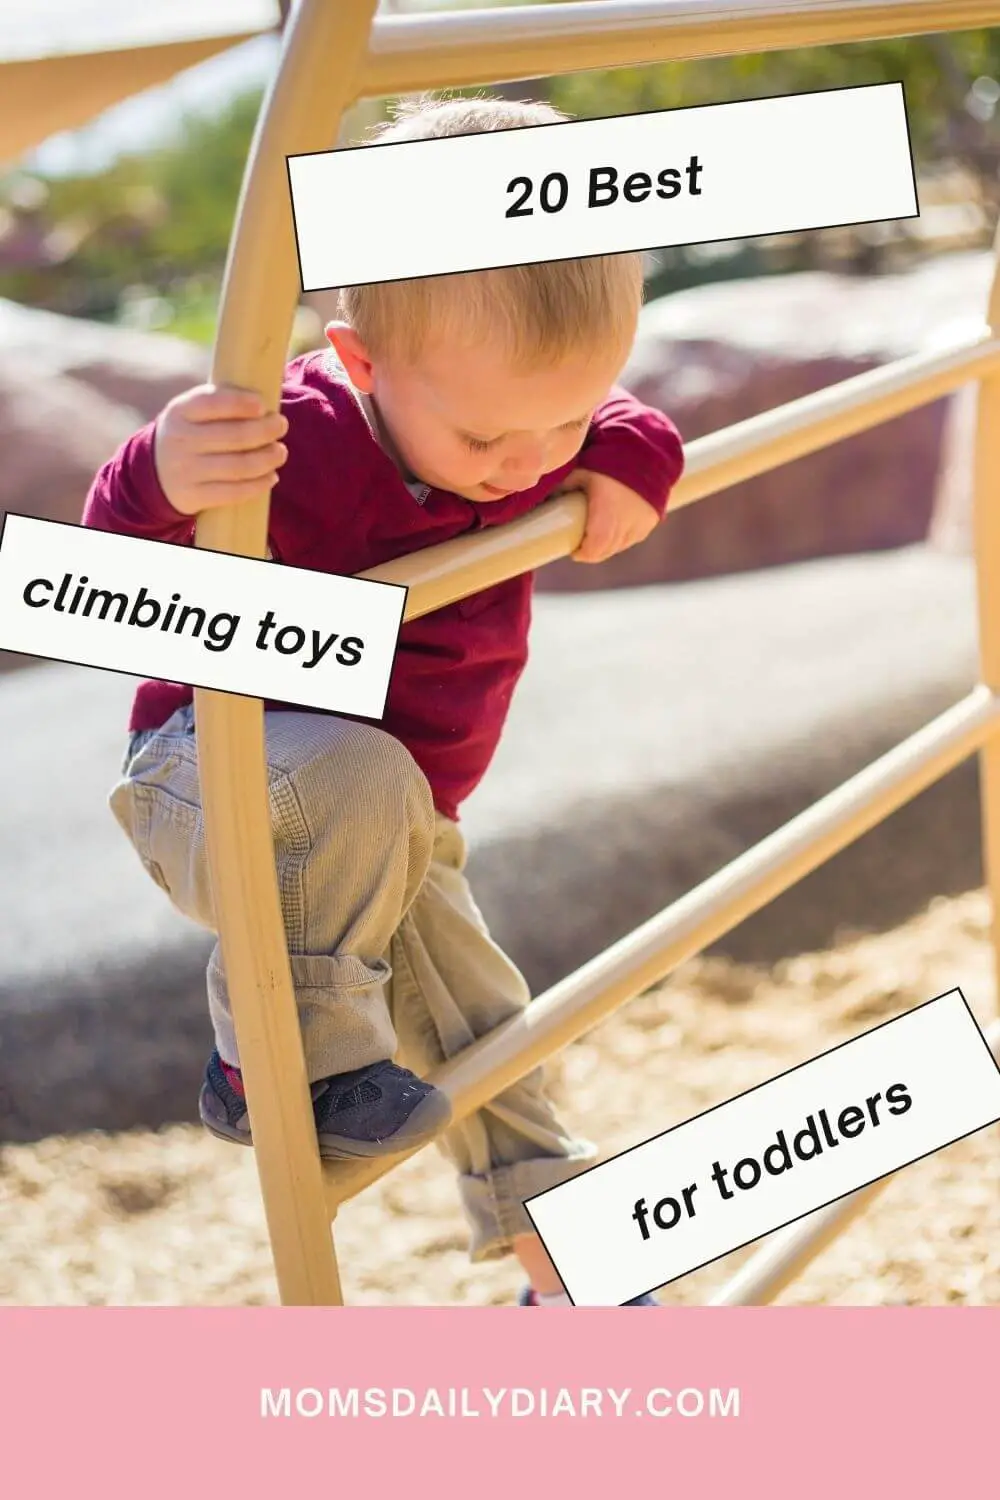 Pinterest pin with a close-up of a toddler climbing and text "20 Best climbing toys for toddlers"